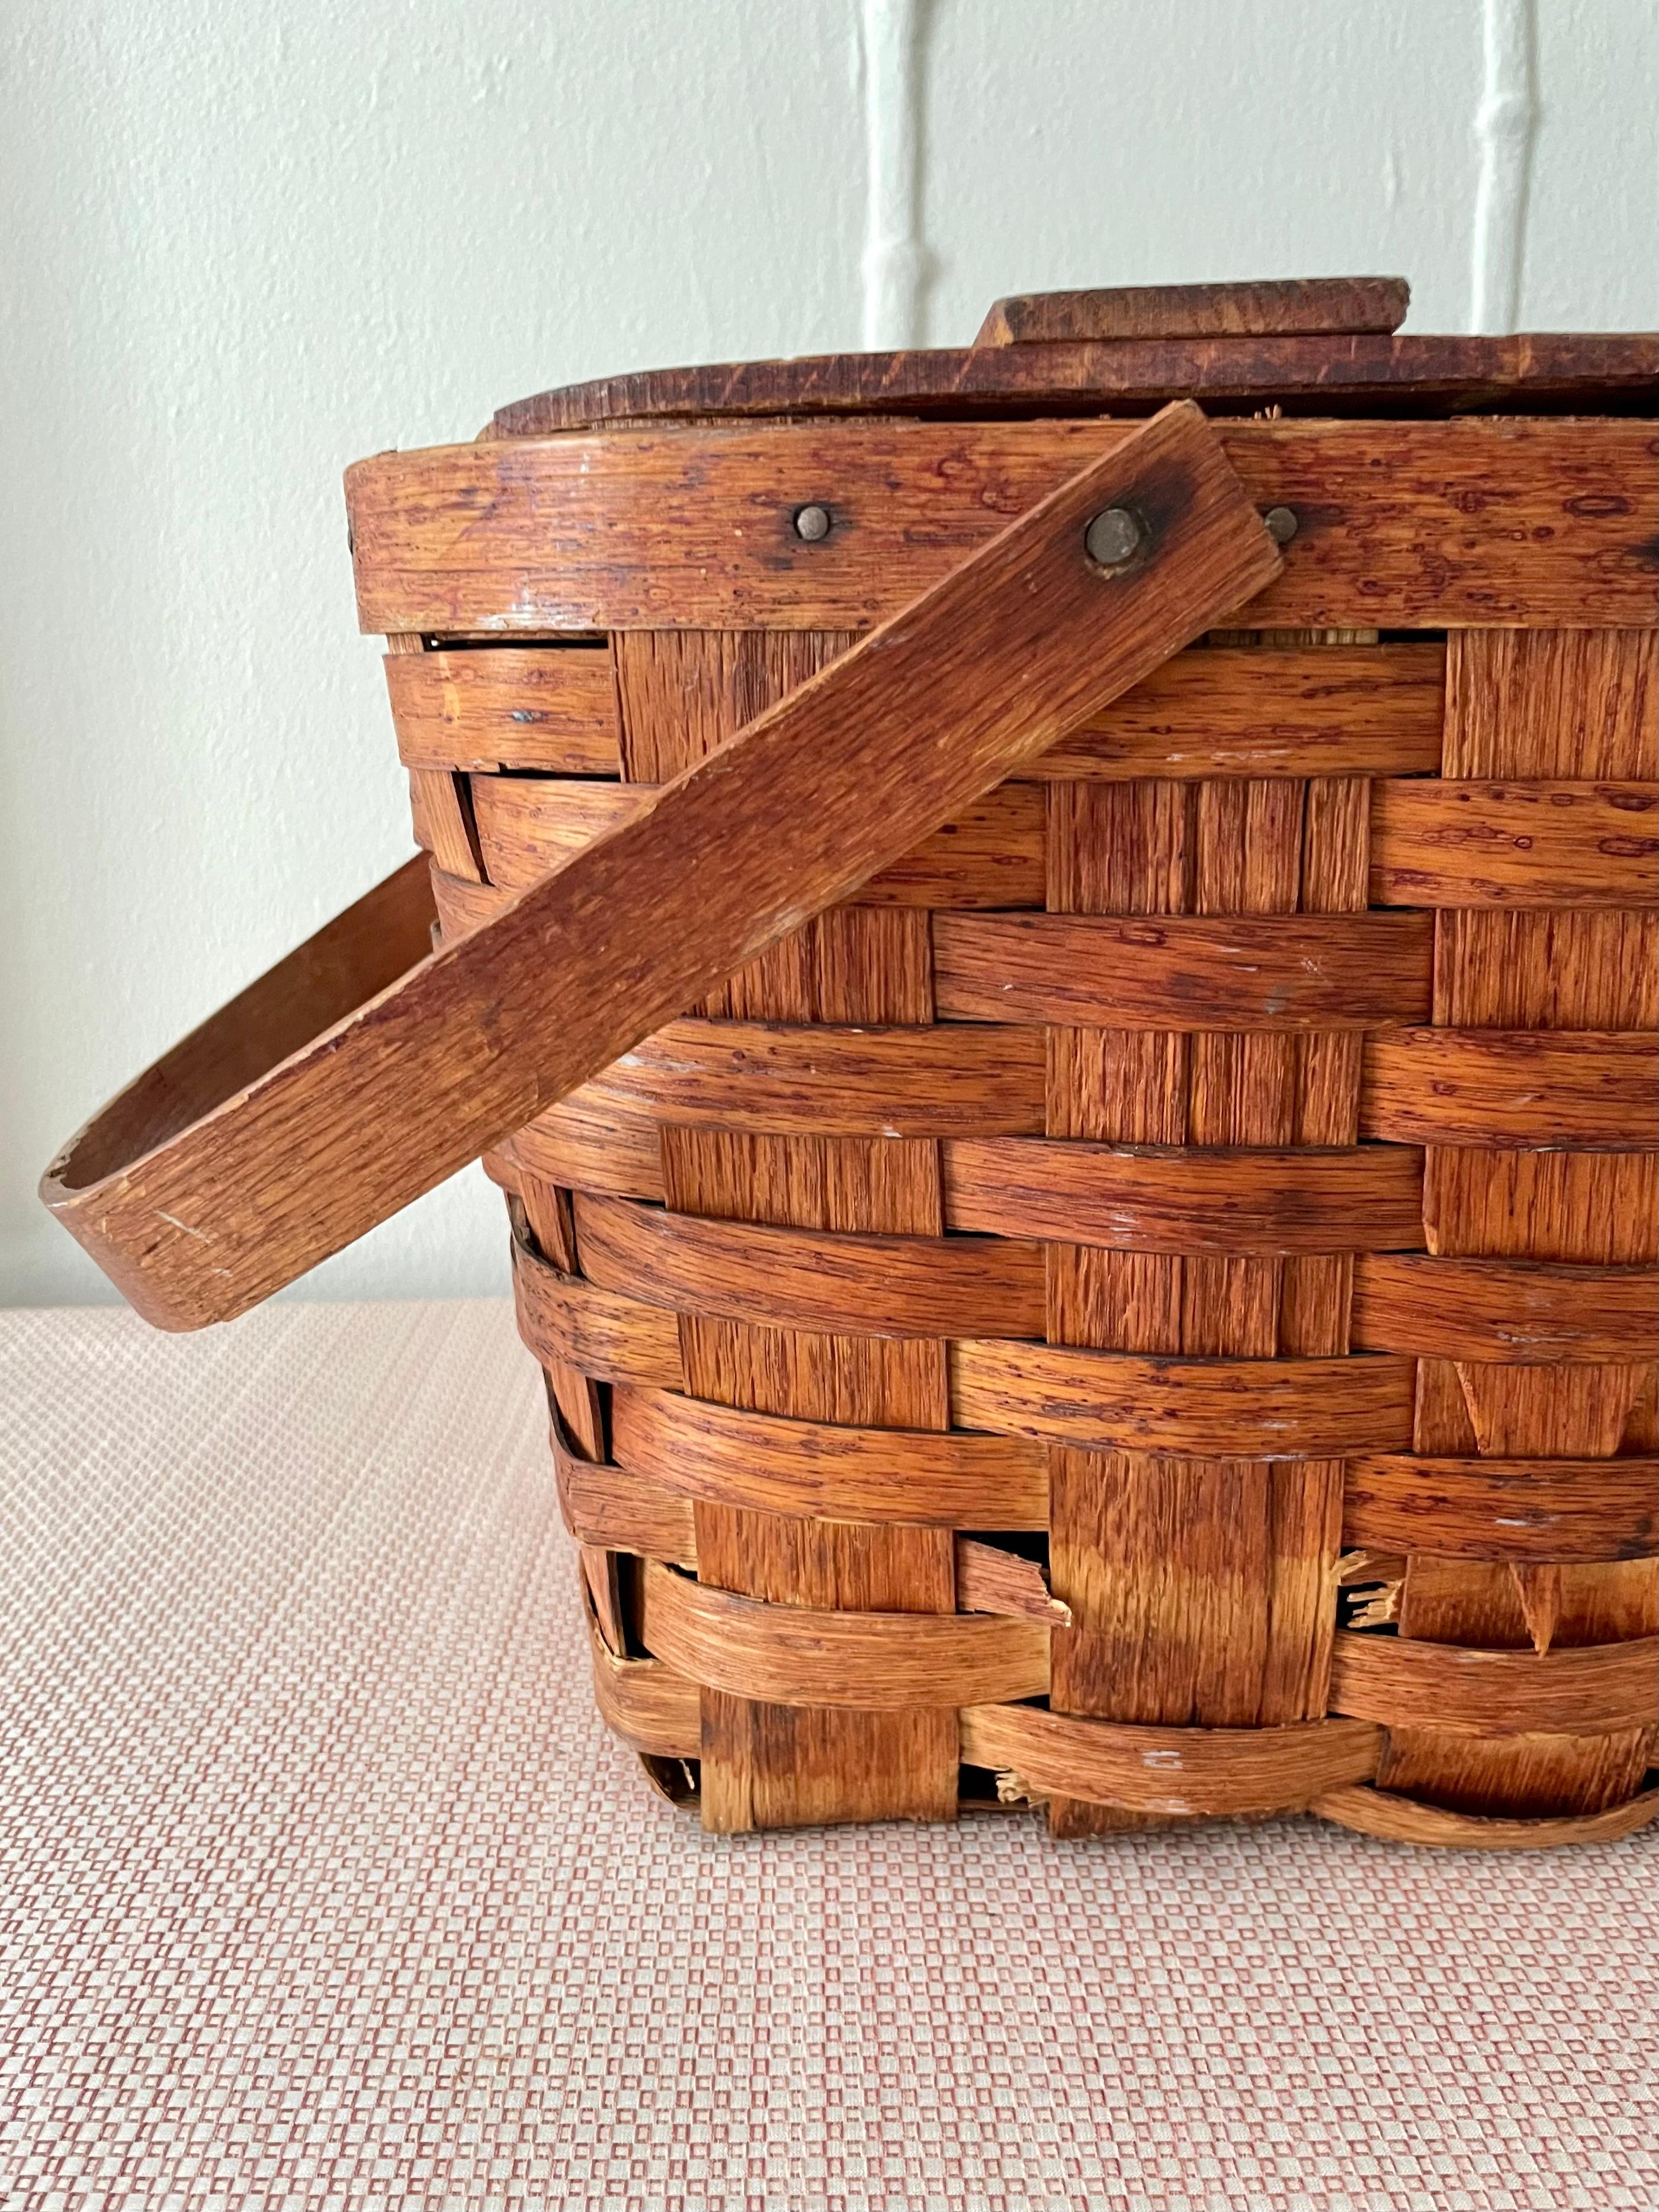 Folk Art Woven Hinged Lid Picnic Basket with Handles For Sale